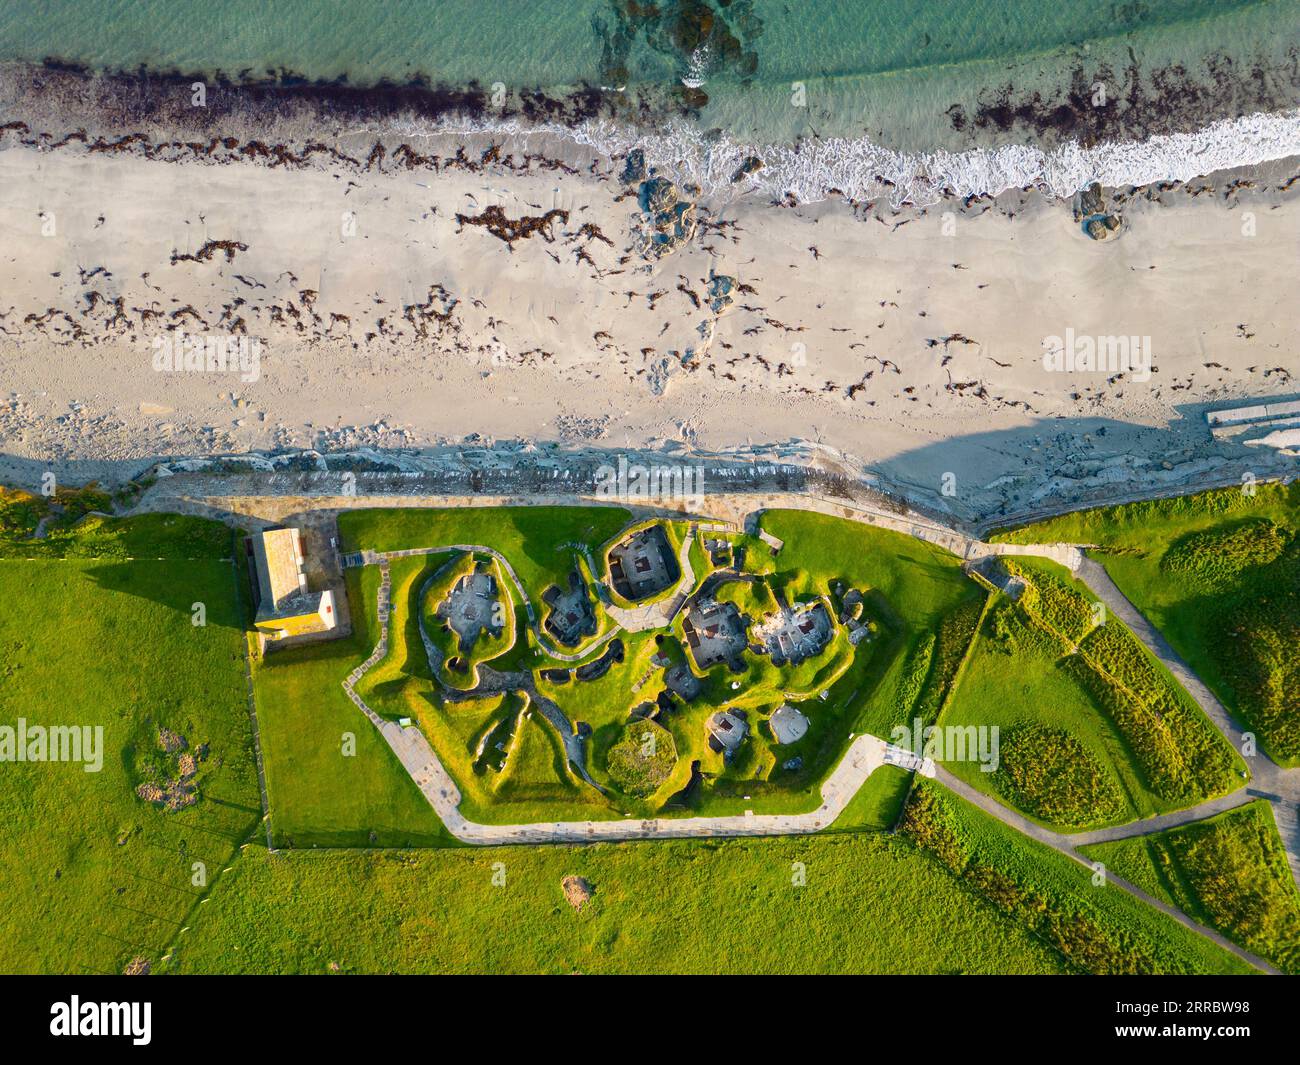 Aerial view of Skara Brae stone-built Neolithic settlement, located on the Bay of Skaill , west mainland, Orkney Islands, Scotland, UK. Stock Photo